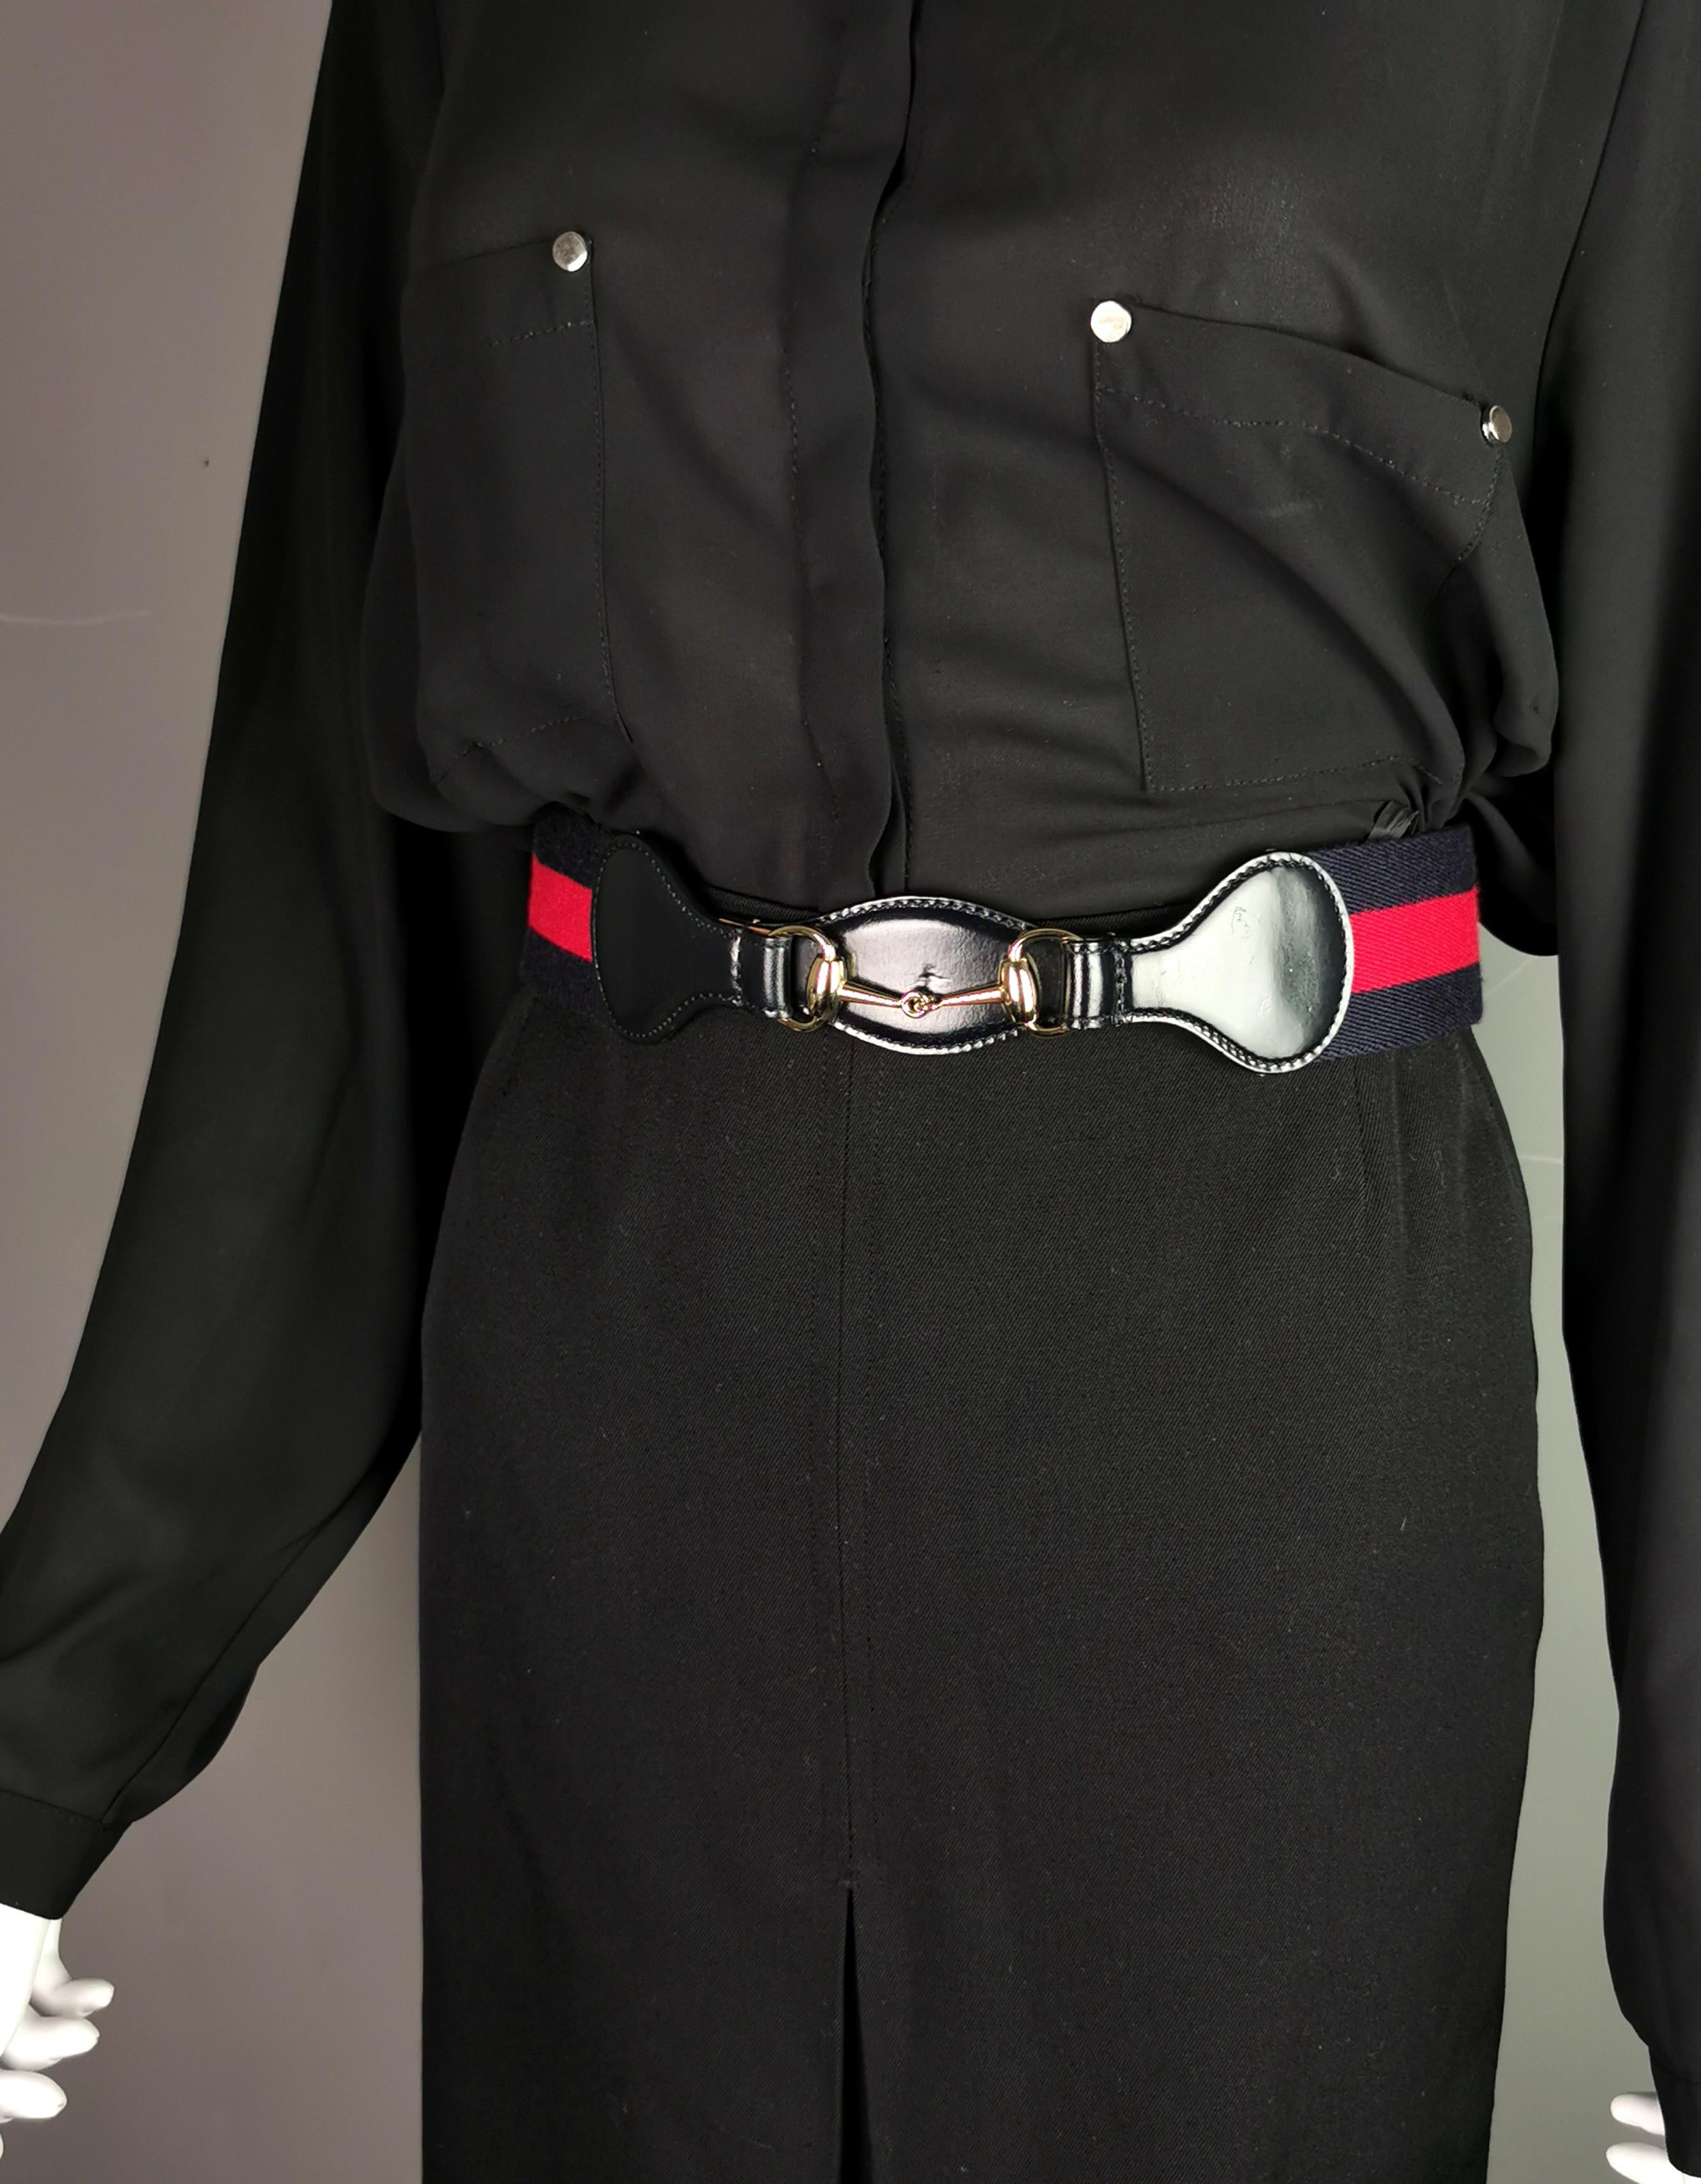 The ultimate must have accessory that's what this stylish vintage Gucci belt is.

The belt is made from classic striped webbed canvas with a glossy navy leather front and straps and a gold tone metal horsebit design to the front.

Some of Gucci's